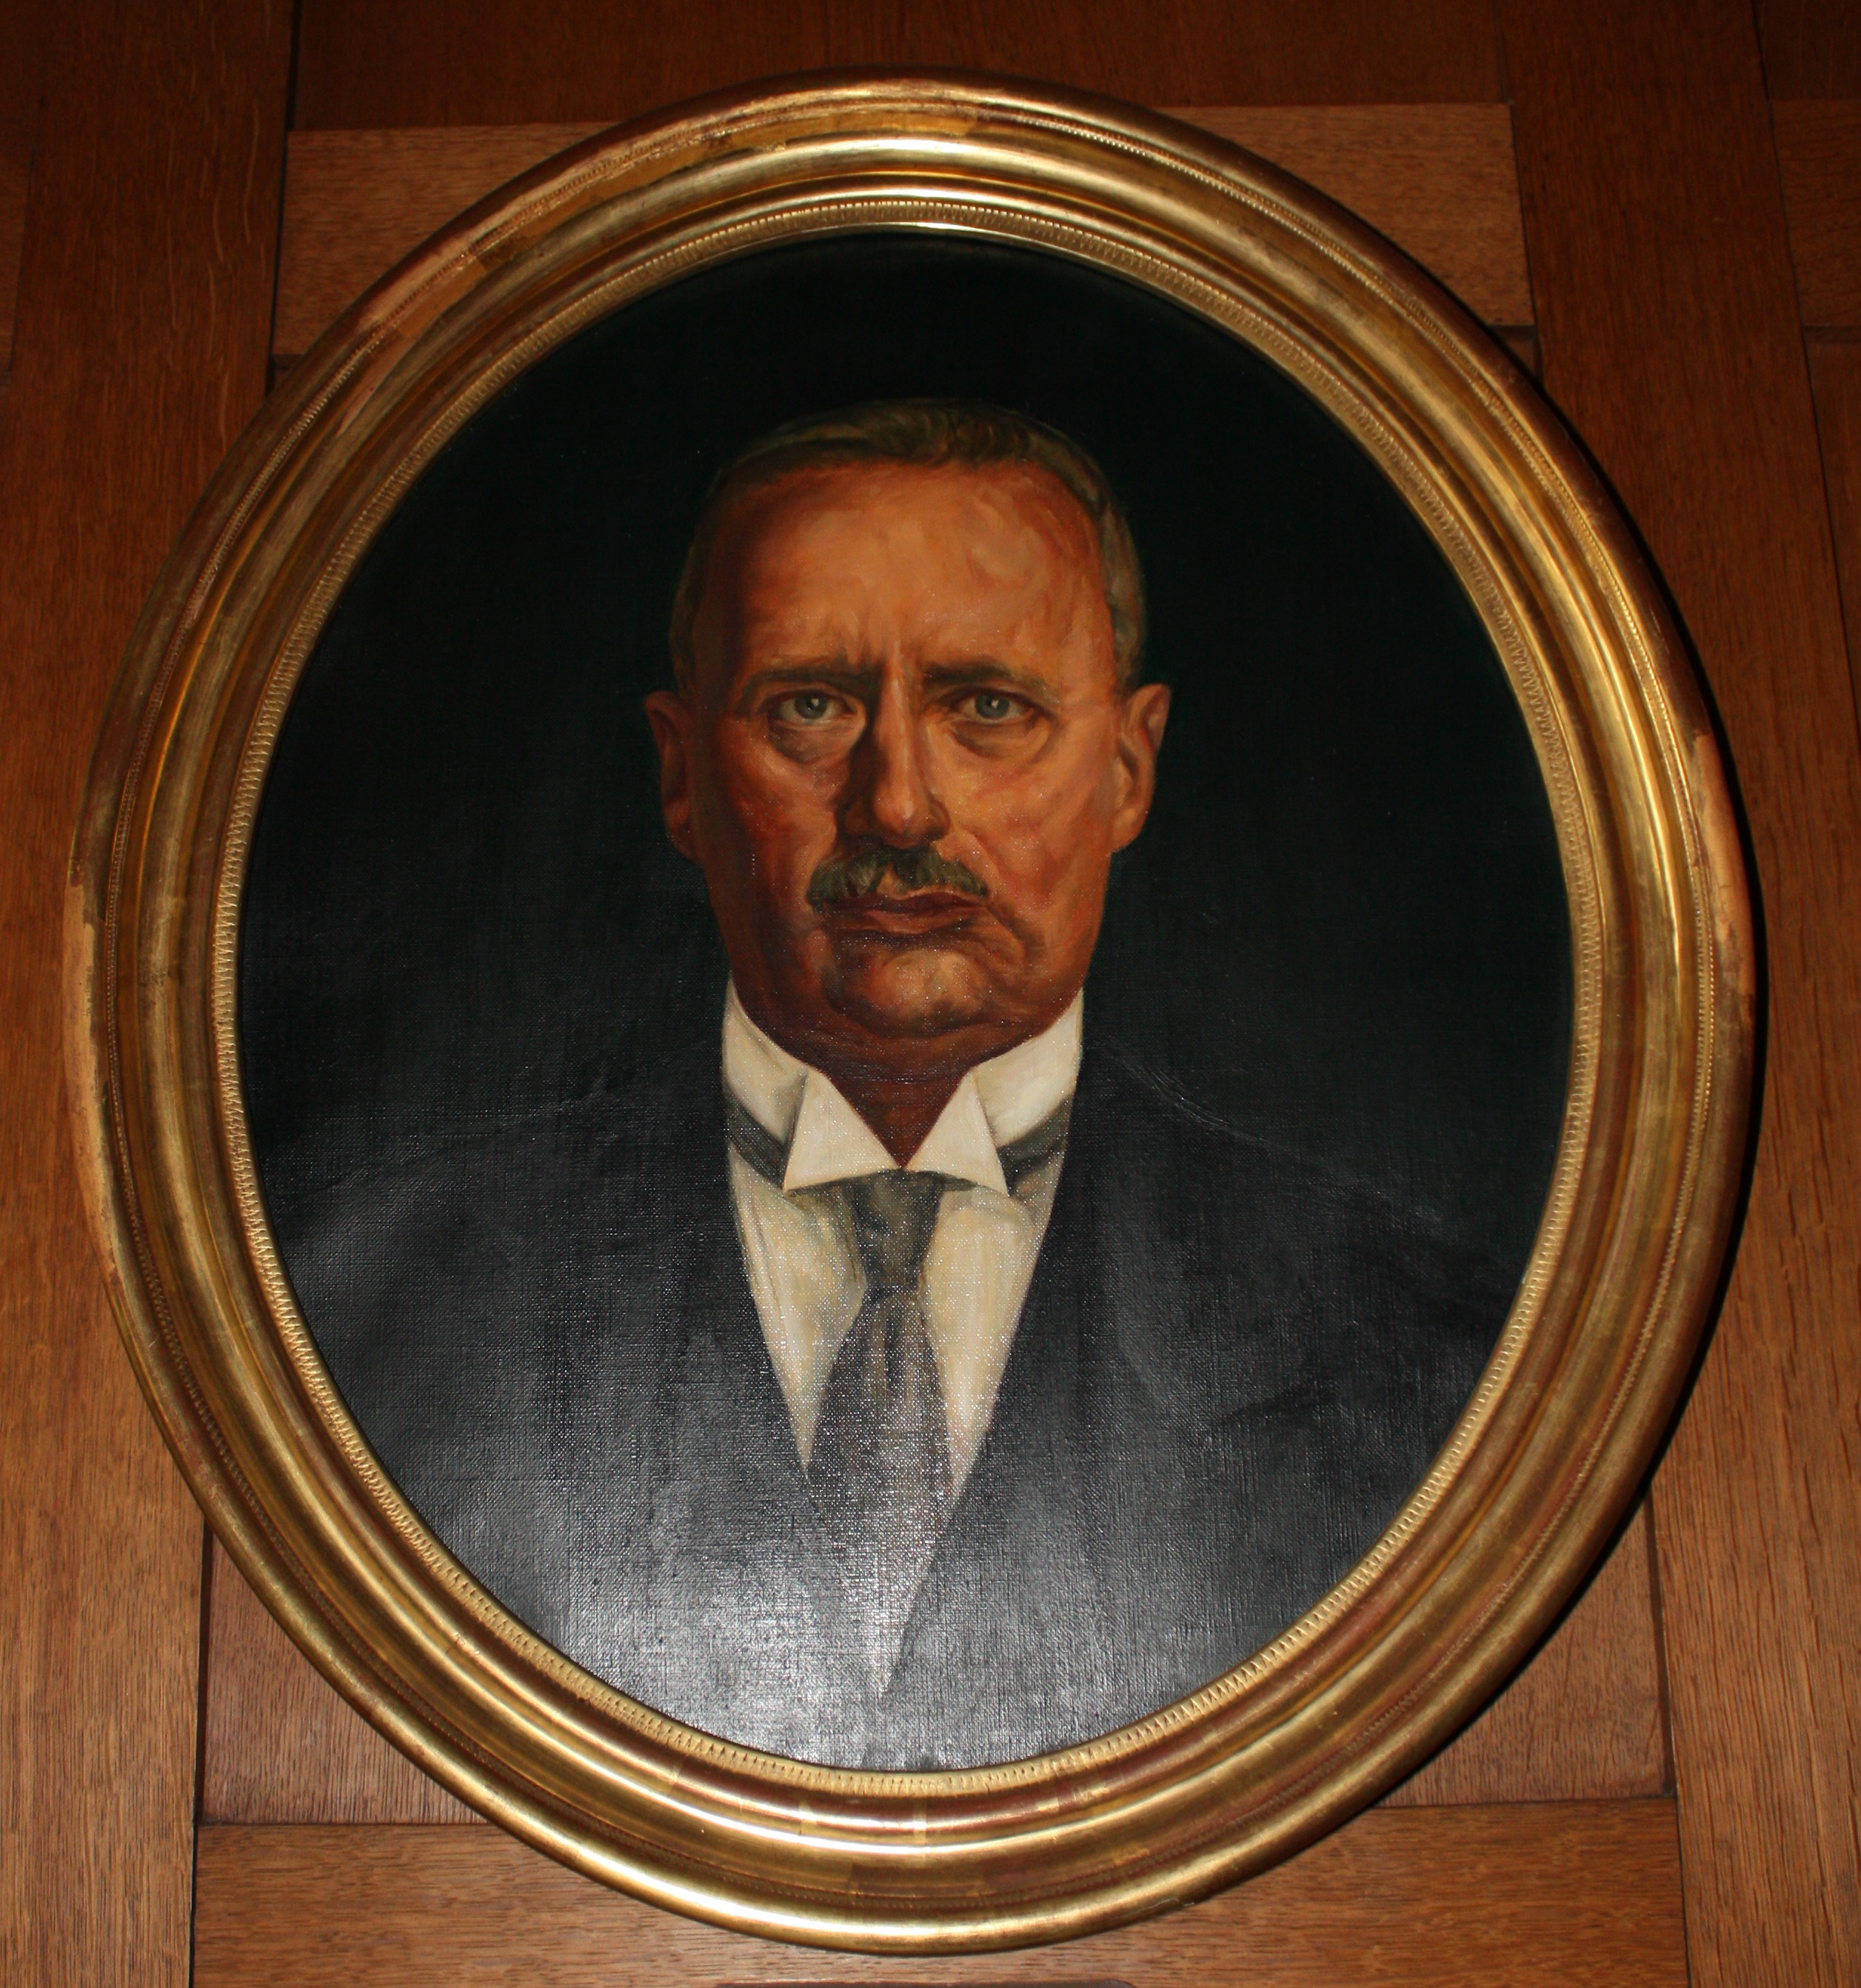 Oberbürgermeister Adolph Dominicus (1911-1921)